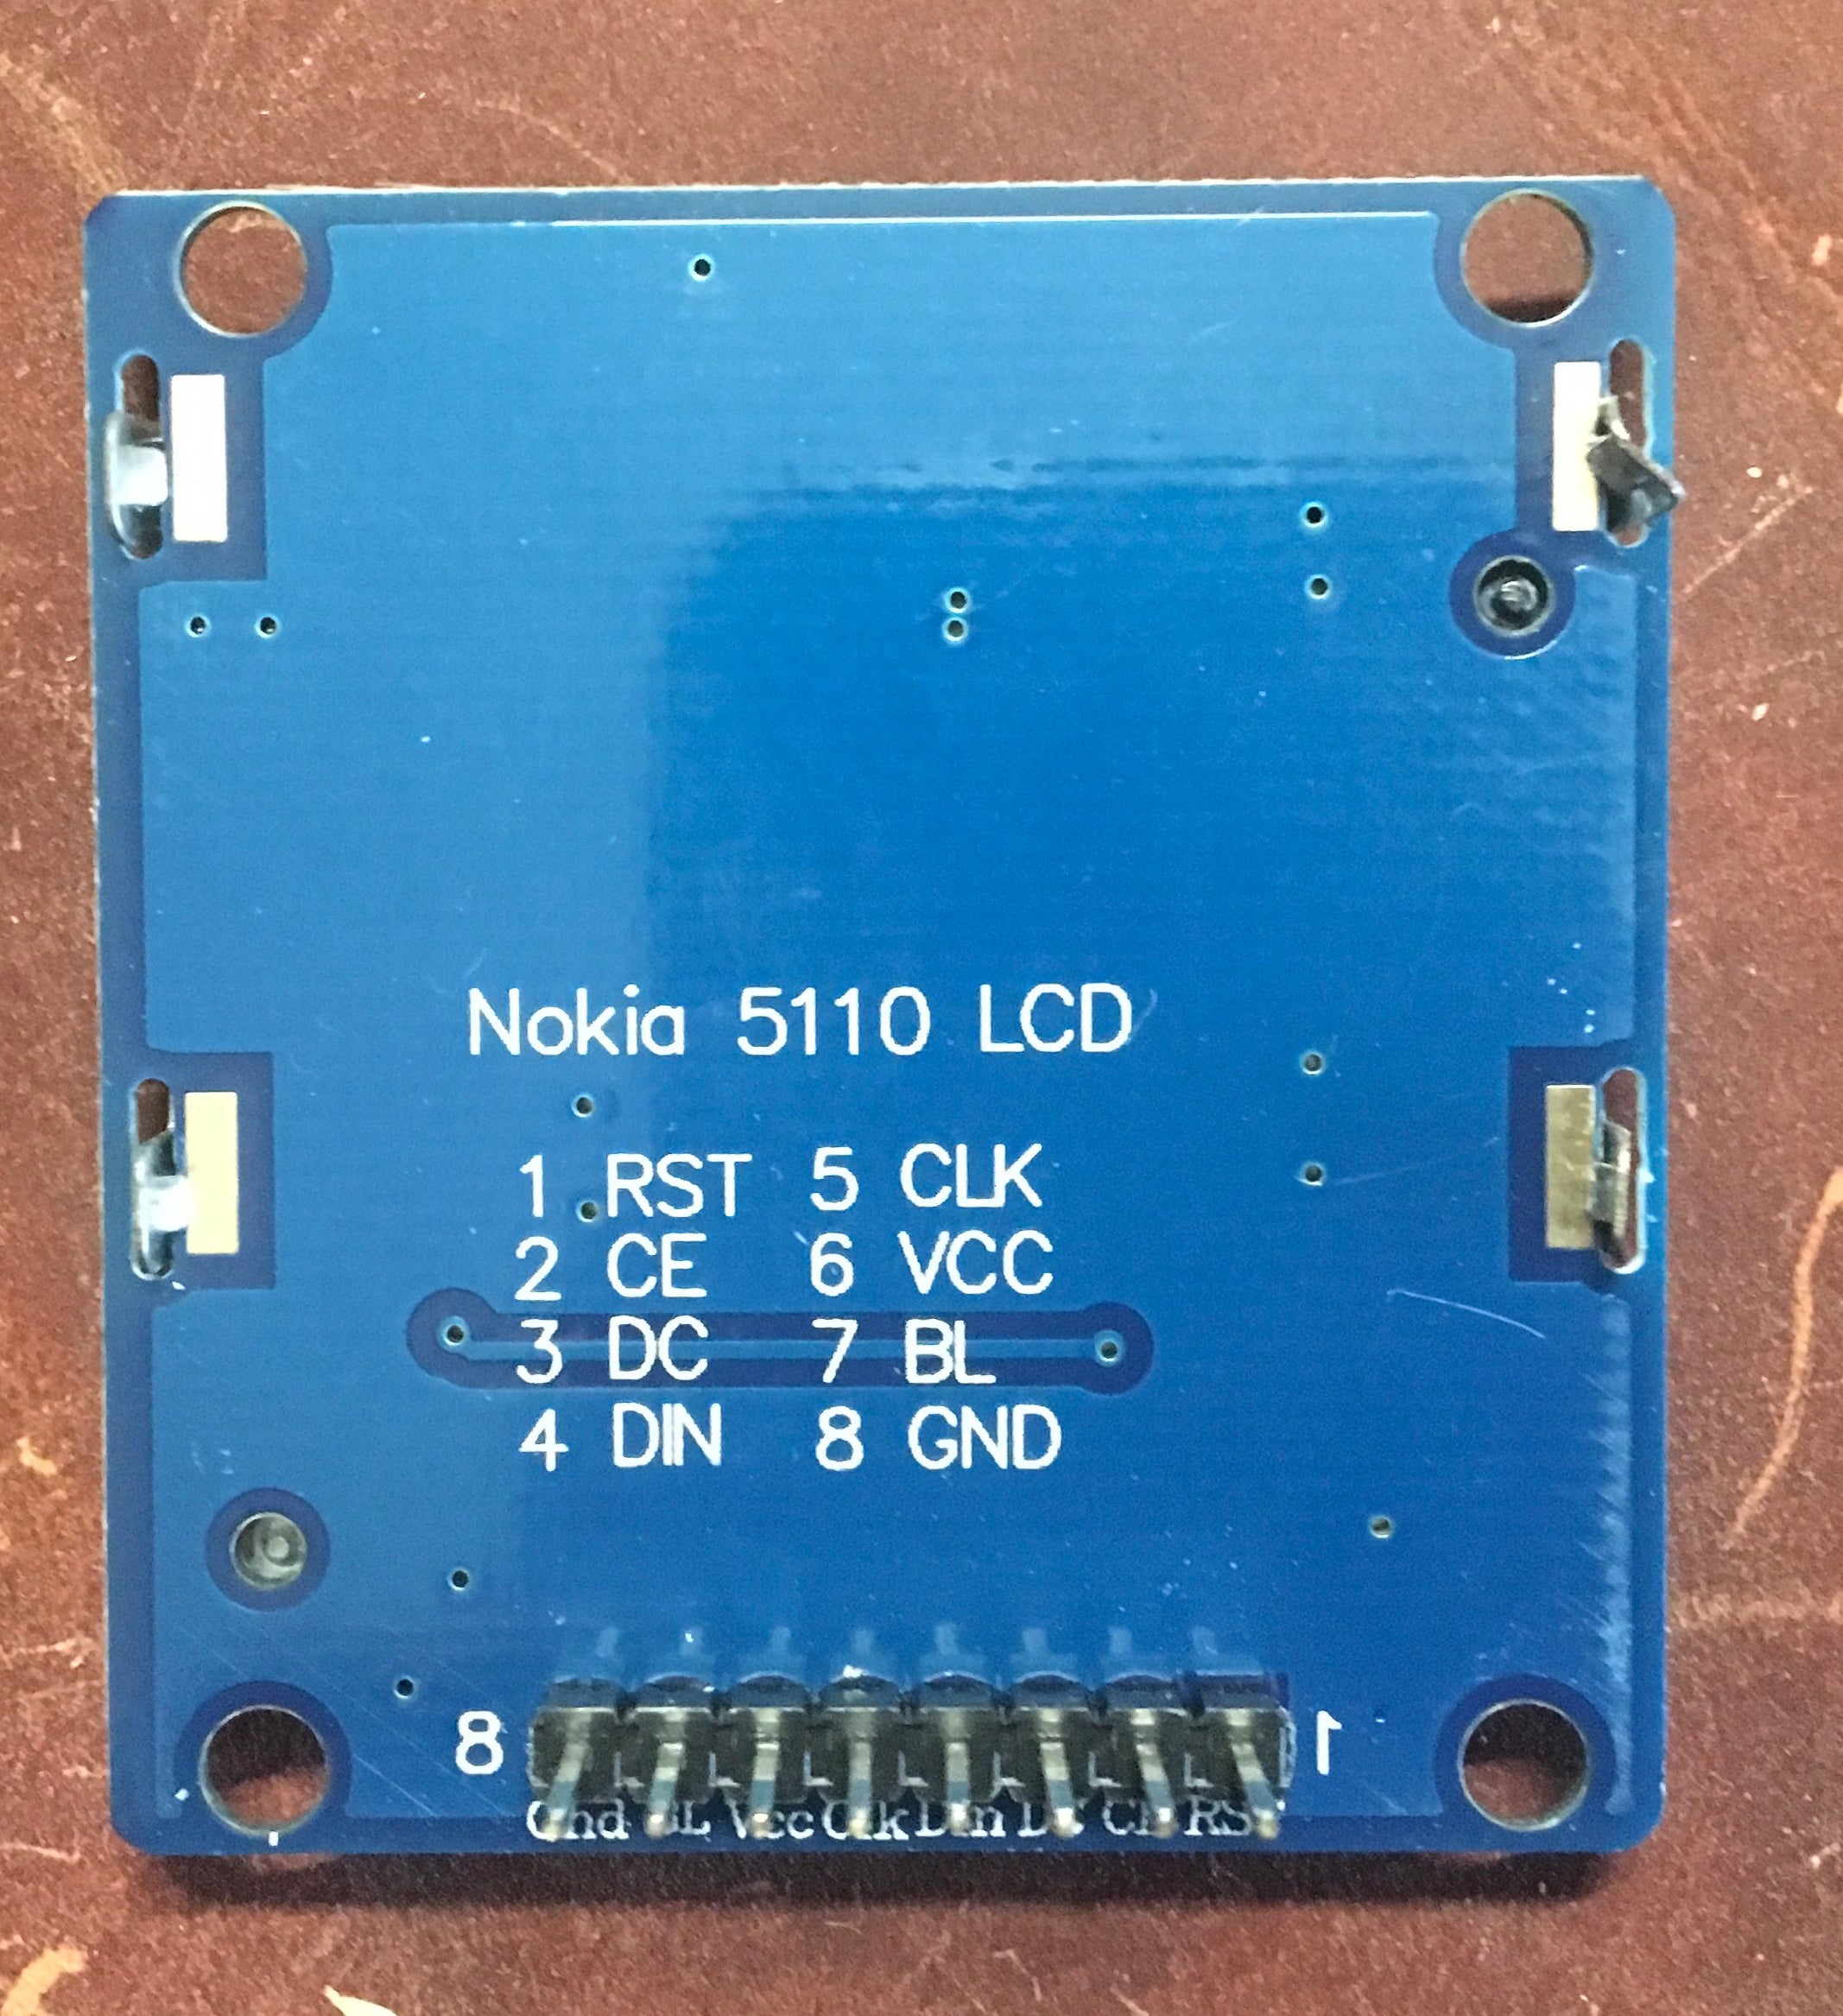 Nokia 5110 LCD 84x48 w PCD8544 3.3v/5v w soldered Headers for Arduino, Raspberry, nodeMCU - Server On The Move